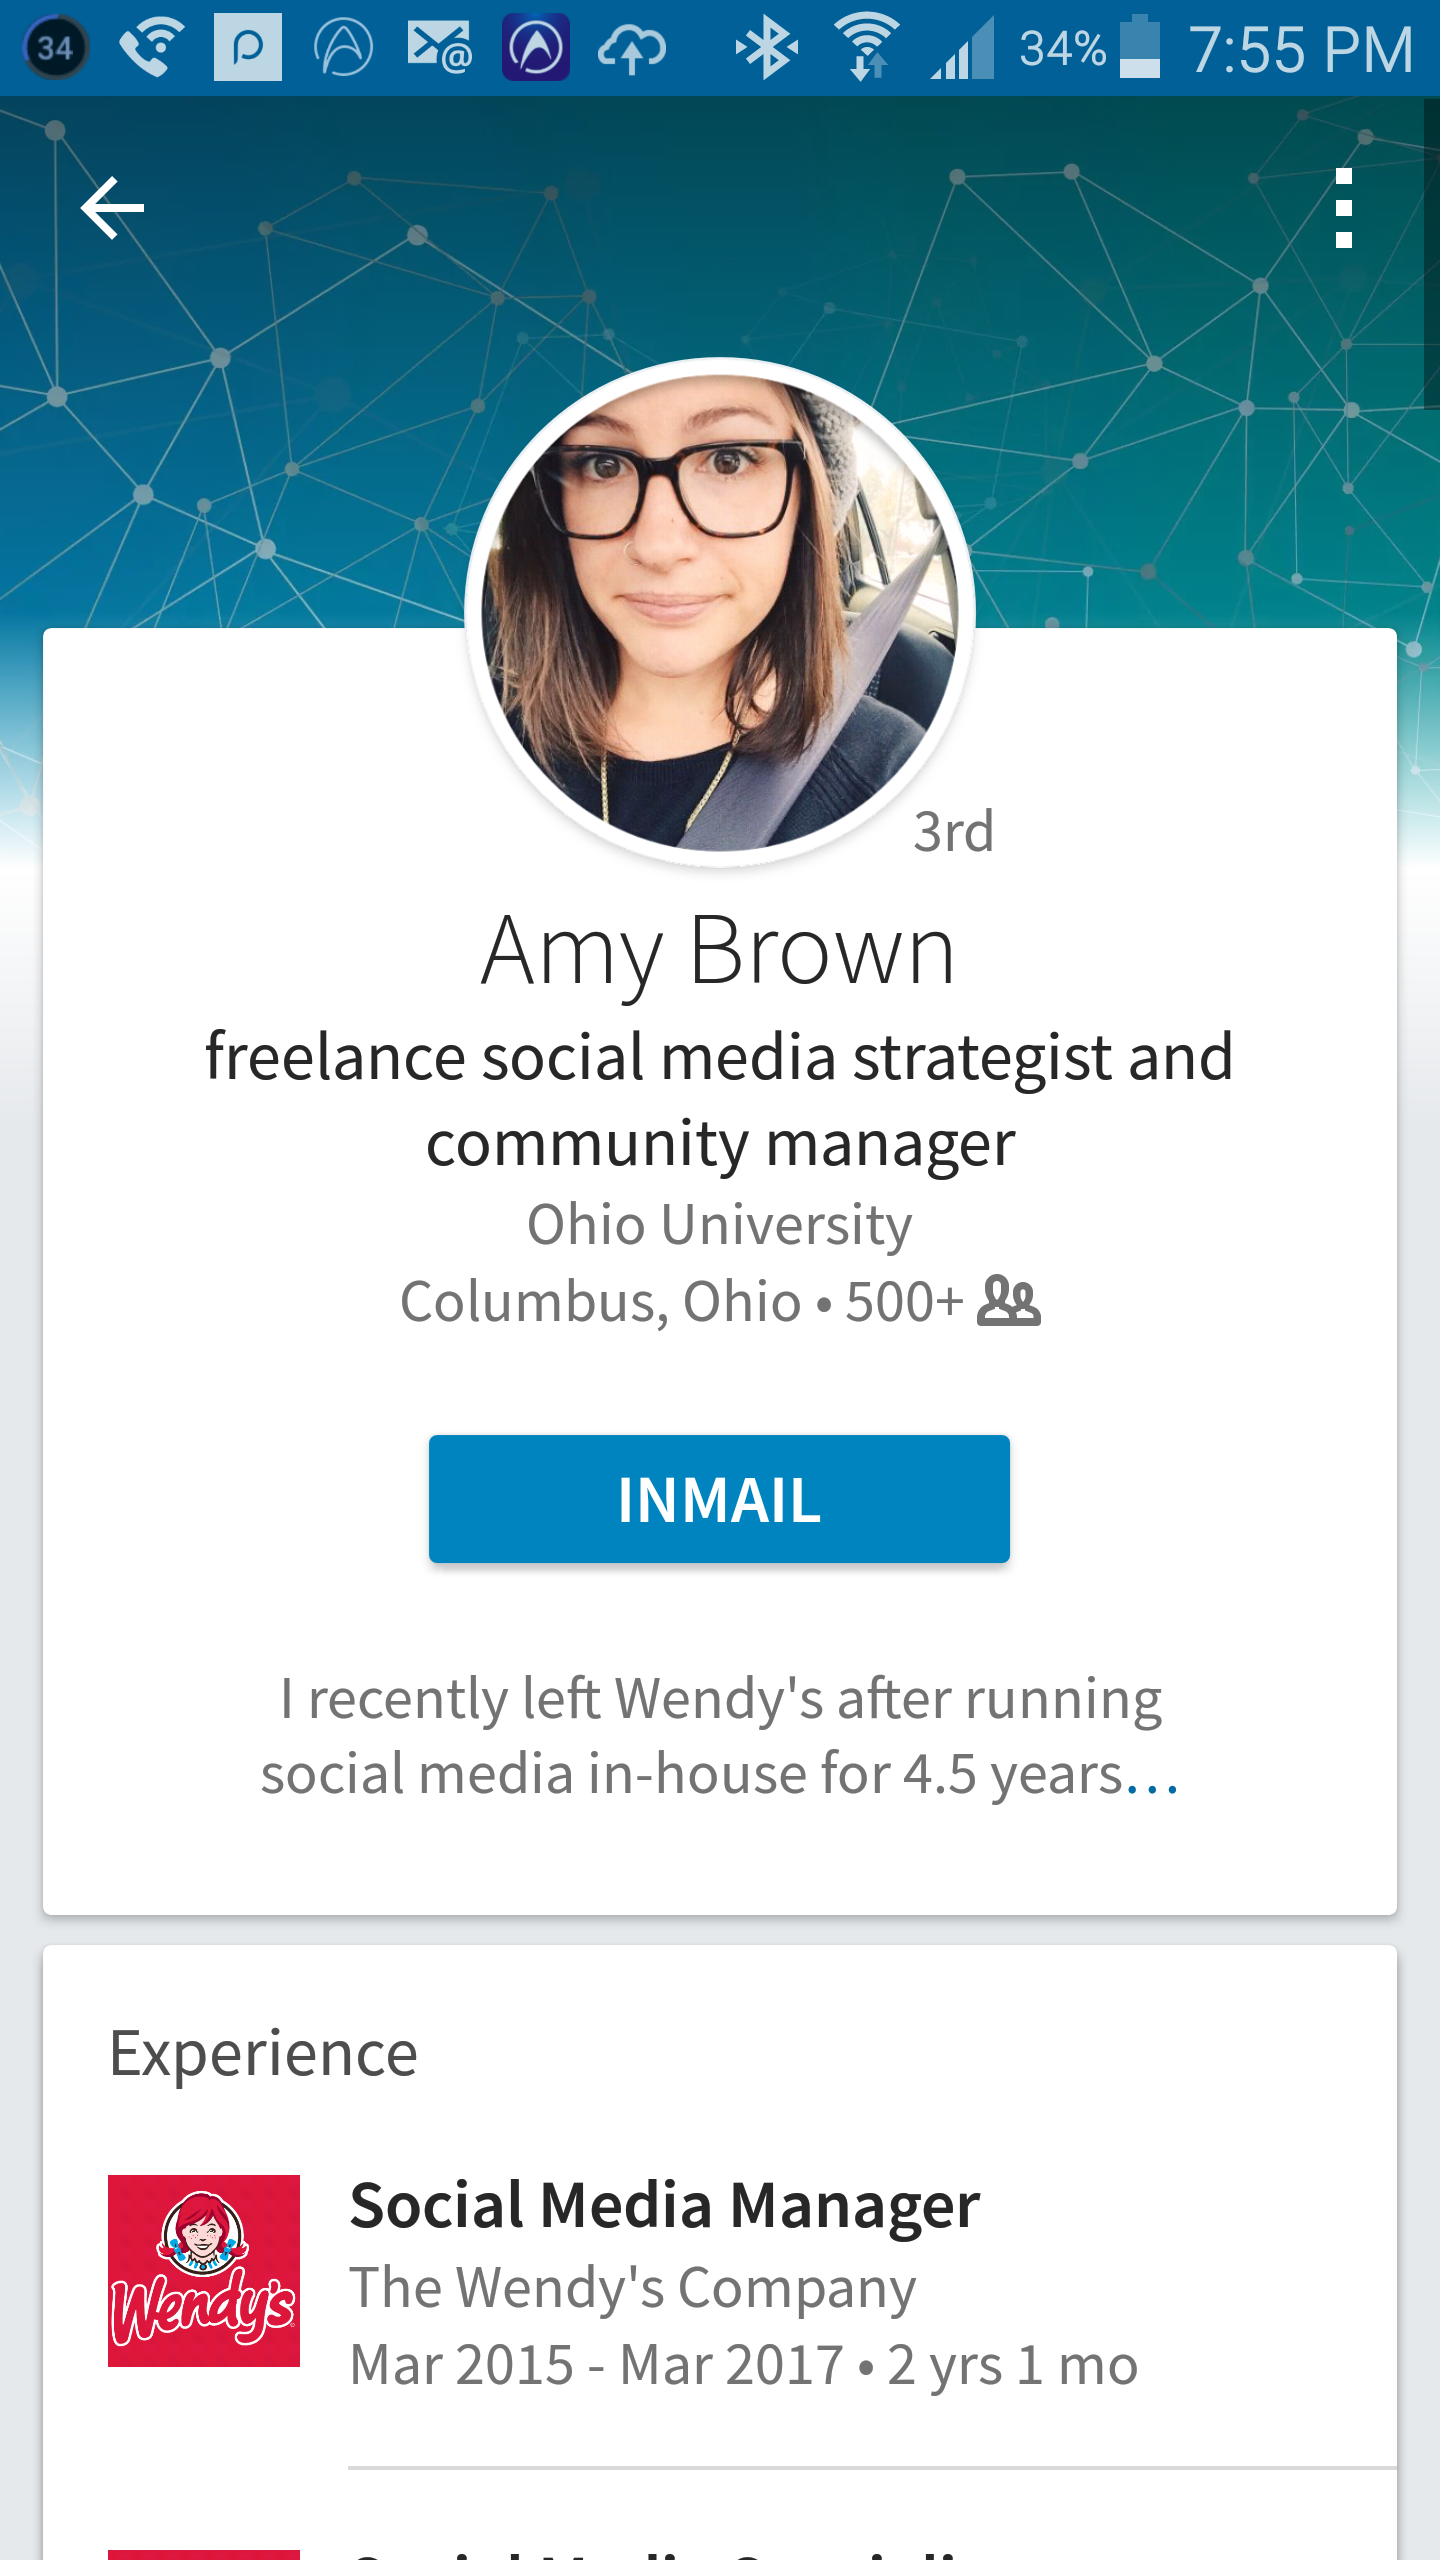 It turned out it was Amy Brown after she left Wendy's after 4 and a half years.